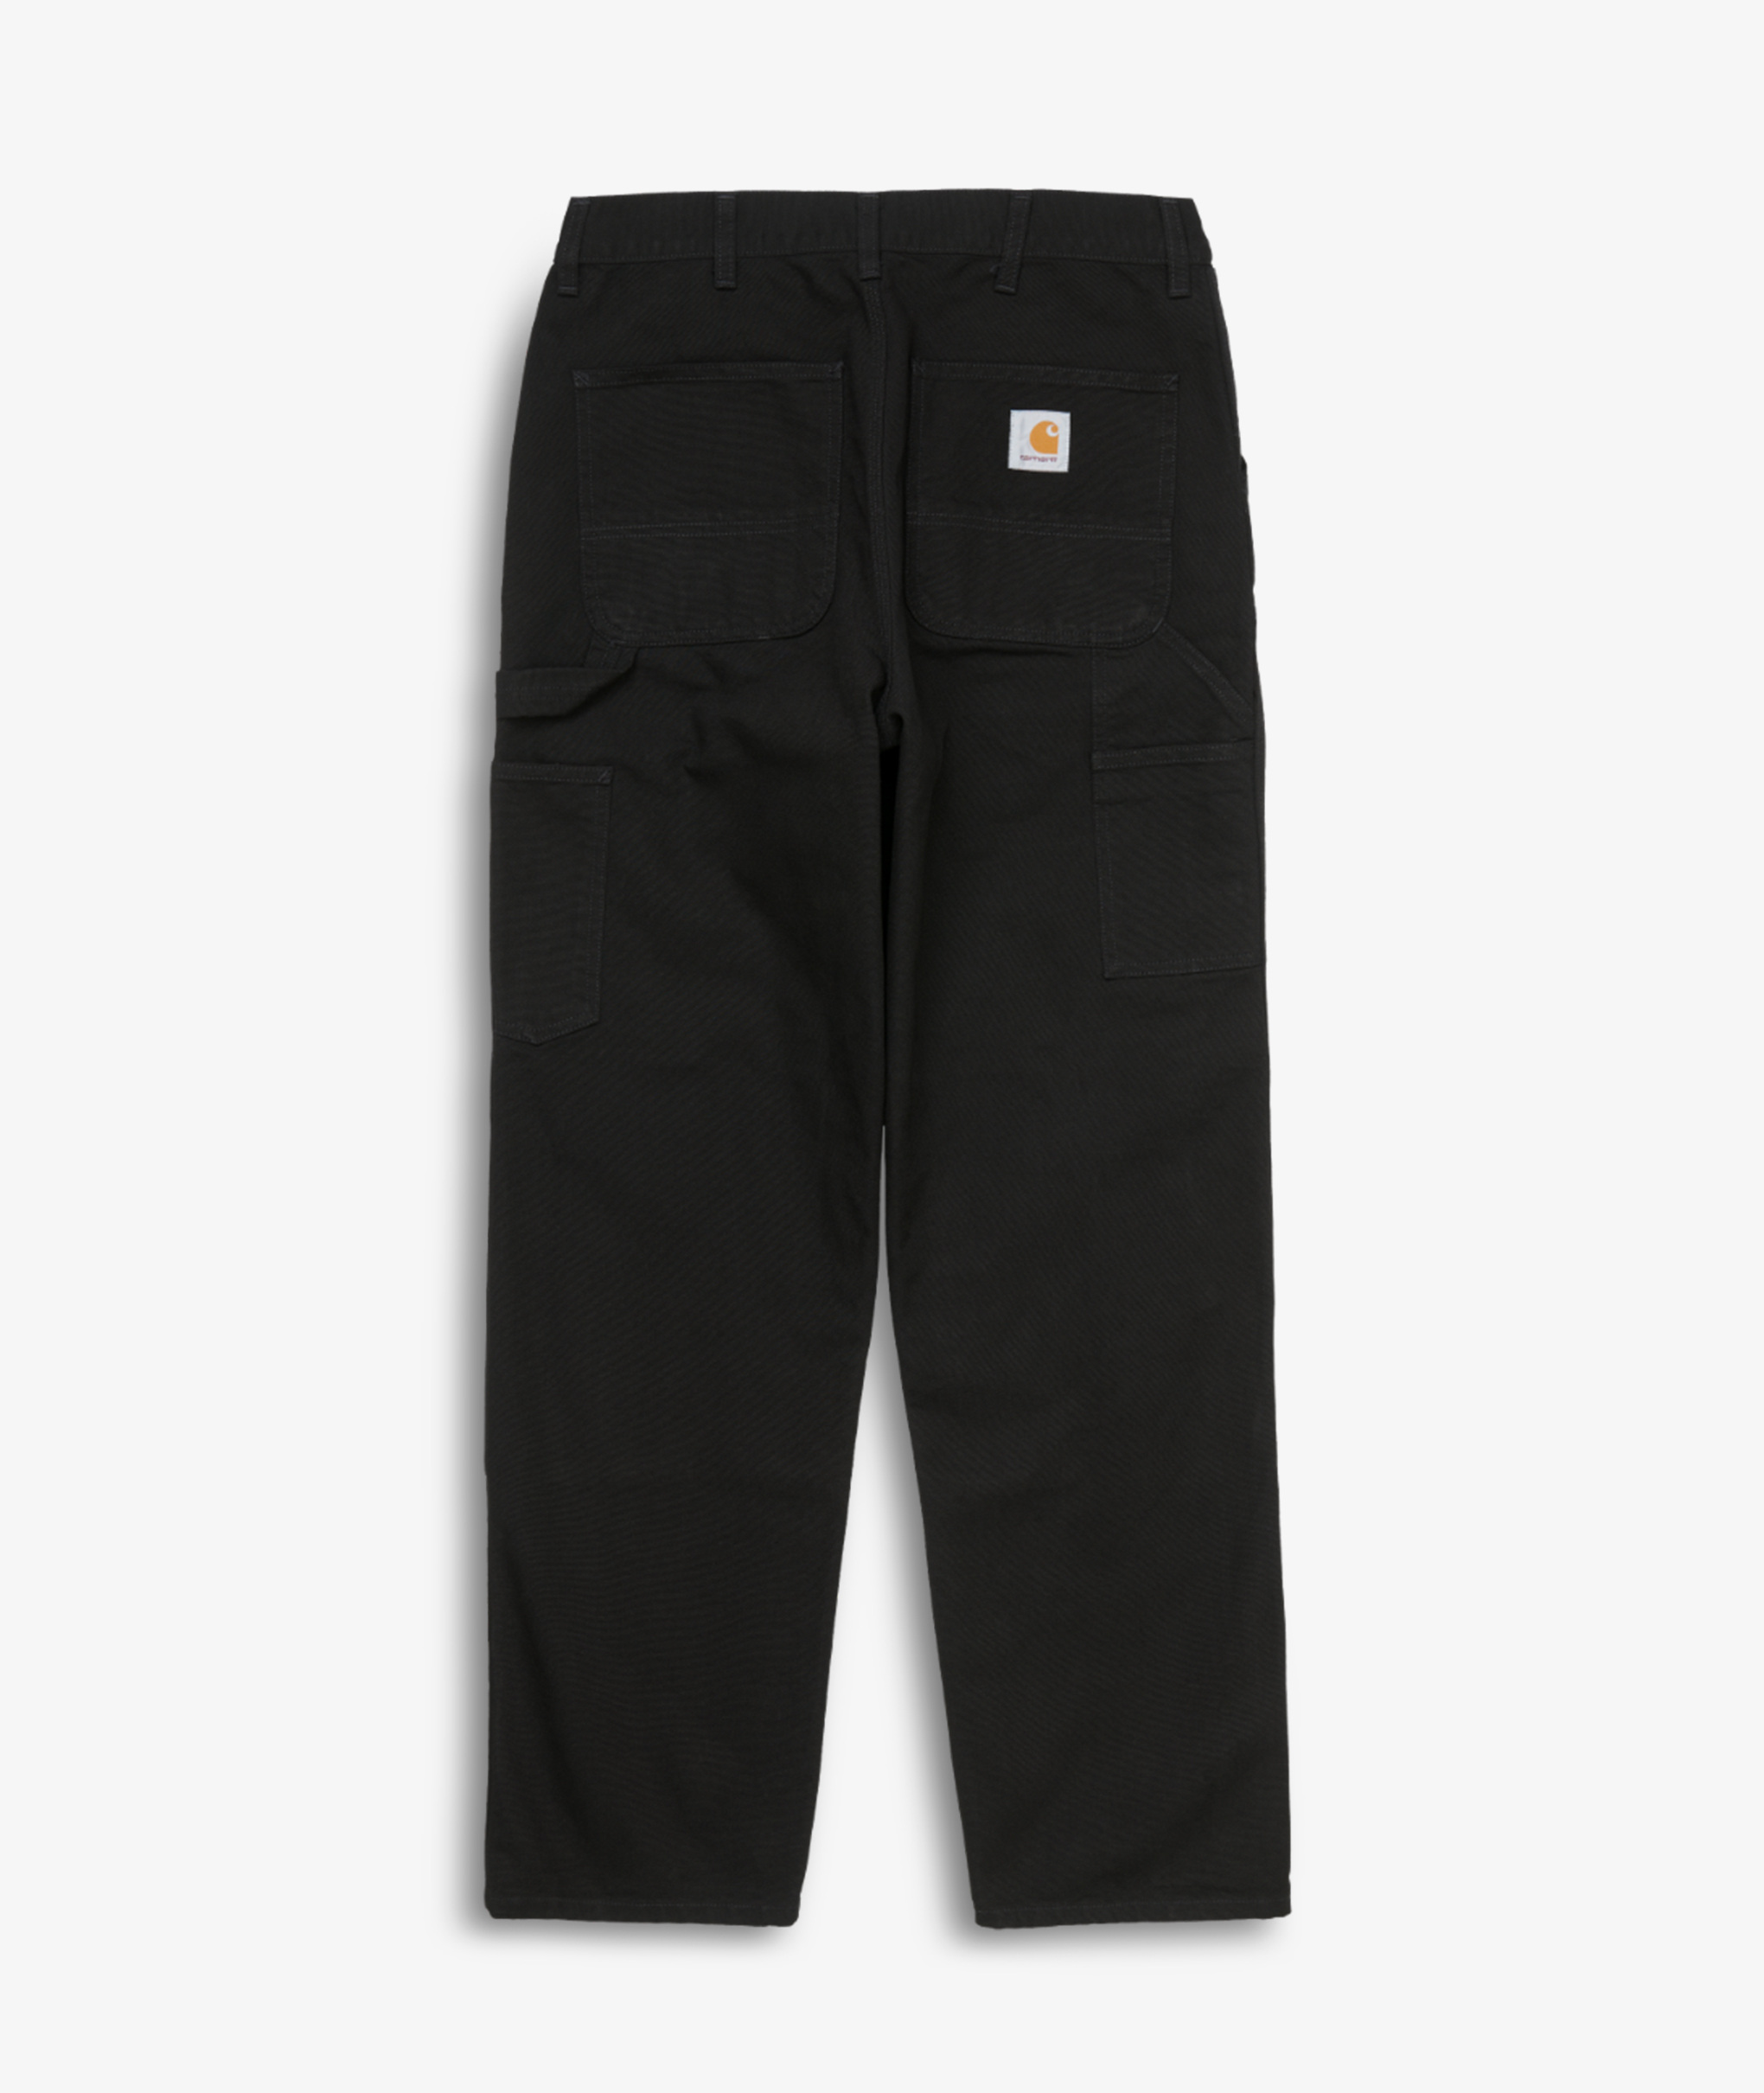 Norse Store  Shipping Worldwide - Carhartt WIP Double Knee Pant